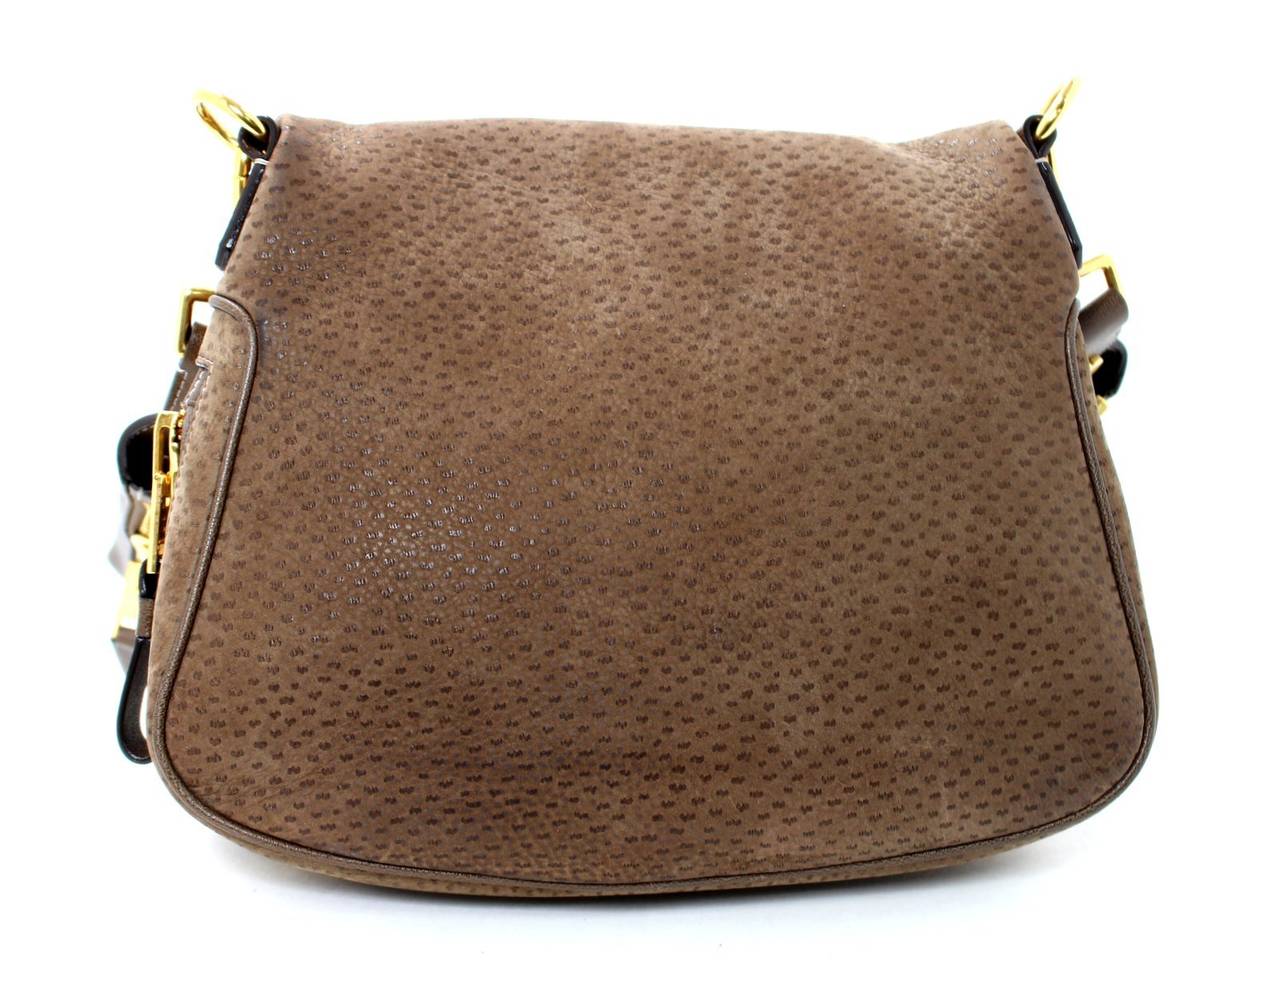 A former store display in pristine condition, Tom Ford Peccary Jennifer Messenger Bag is a beautiful collectible piece.  Designed and named for actress Jennifer Anniston, the style comes in a multitude of fabrications and sizes.  This rare version